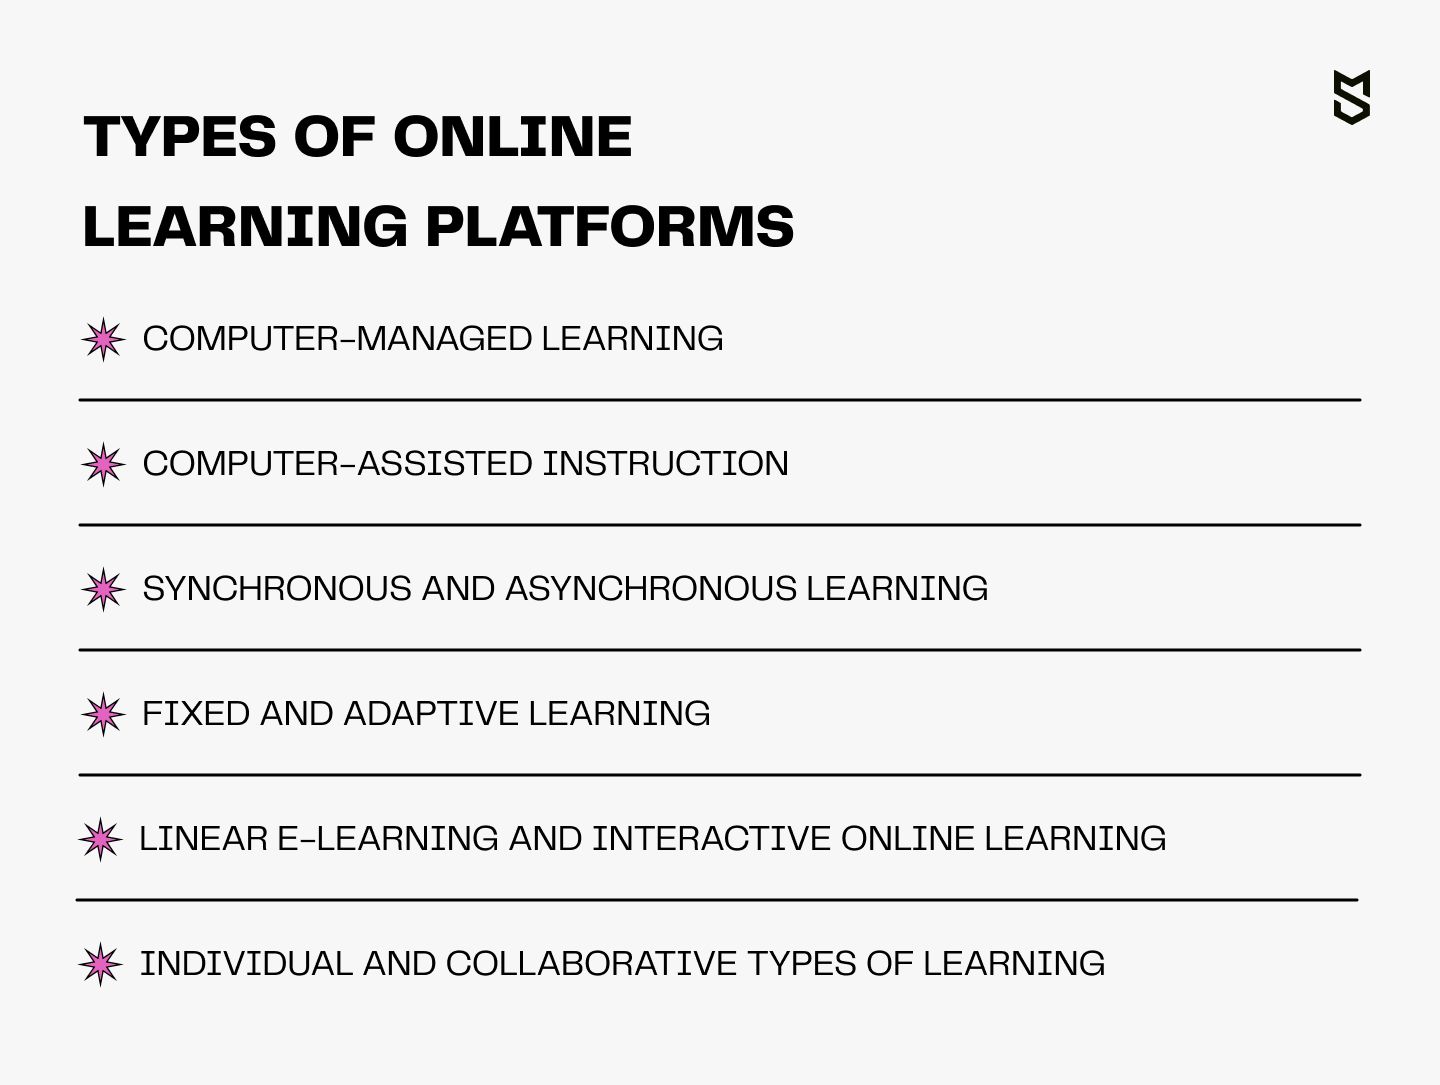 Types of online learning platforms